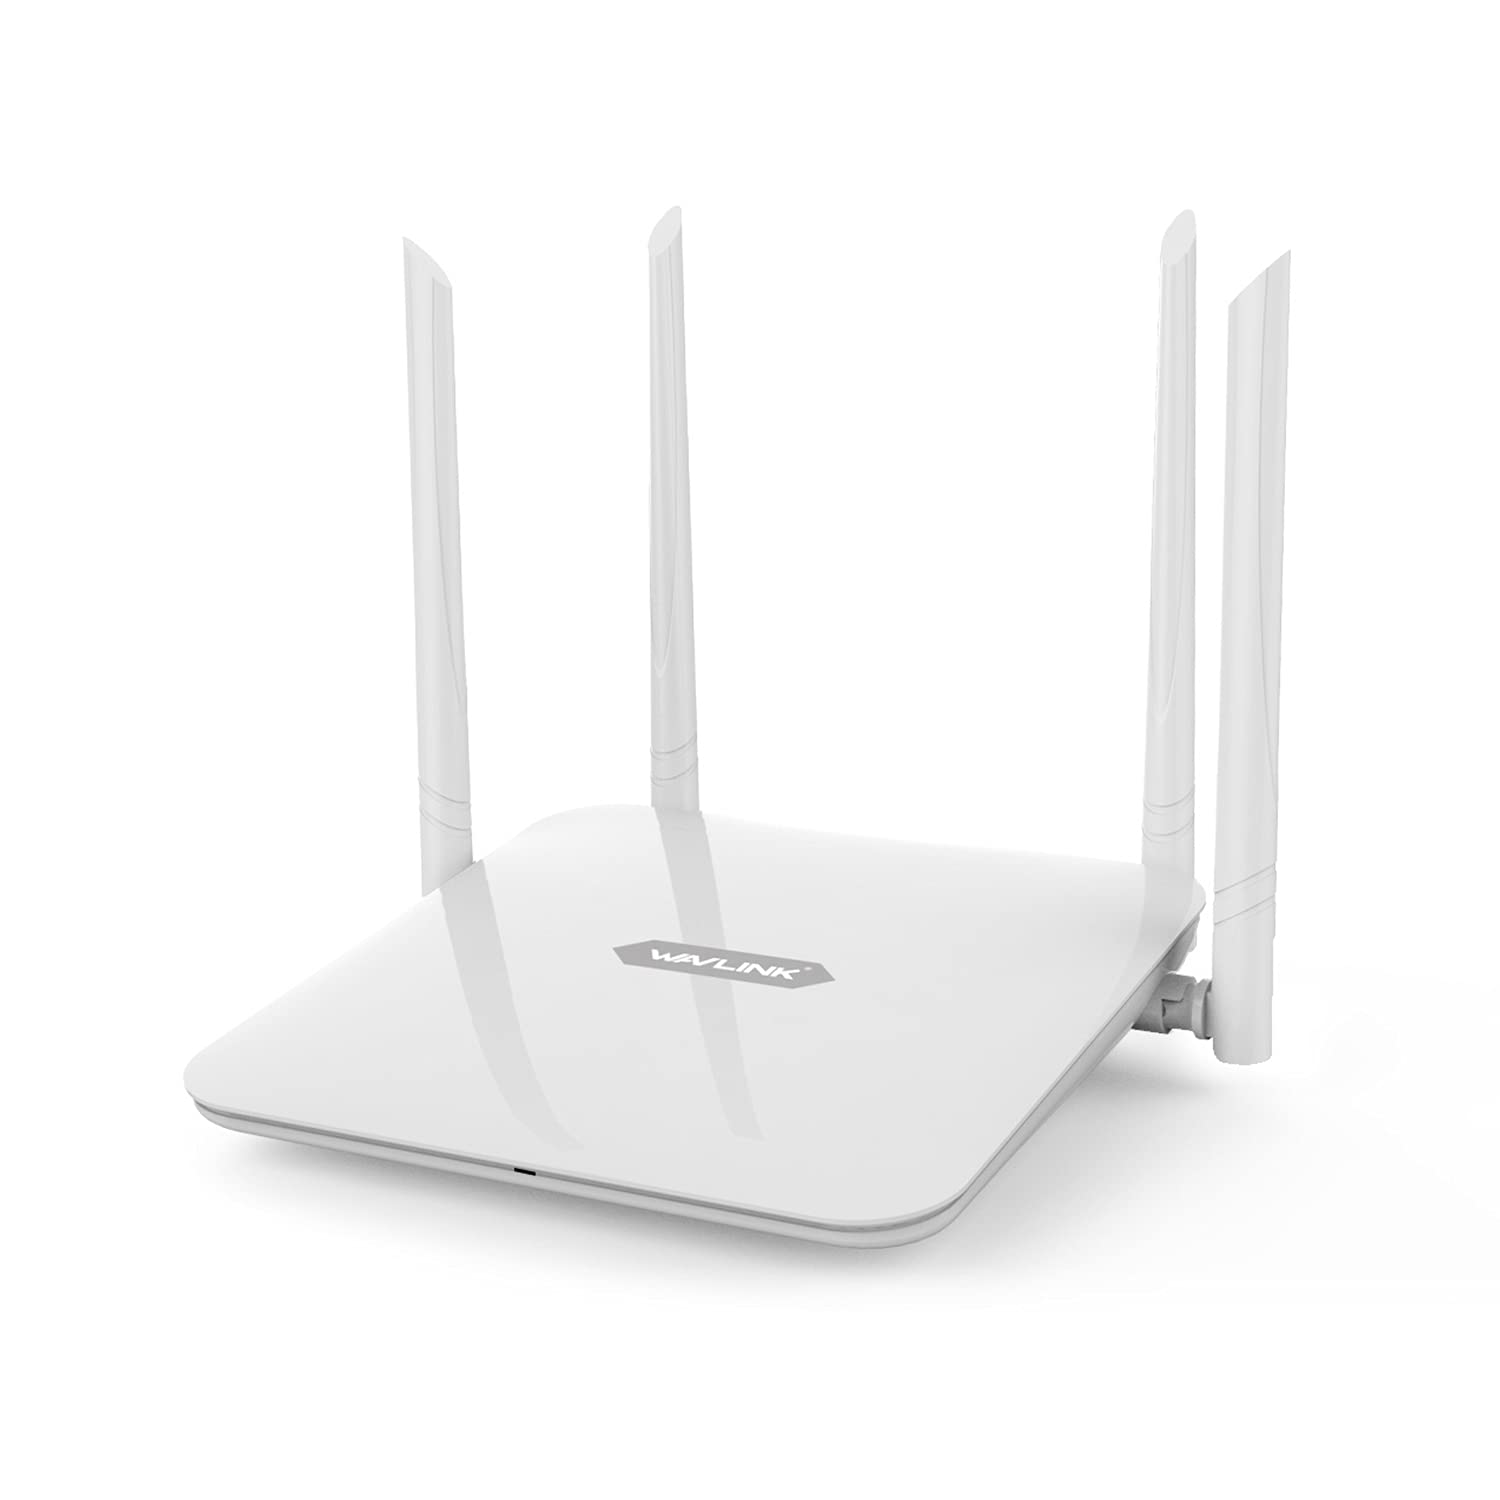 WAVLINK AC1200 Dual-Band Wireless Router, High Speed WiFi Router with 5dBi High Gain Antenna for Home Office Internet Gaming (Wlan Access Point/WISP Mode, WPS)